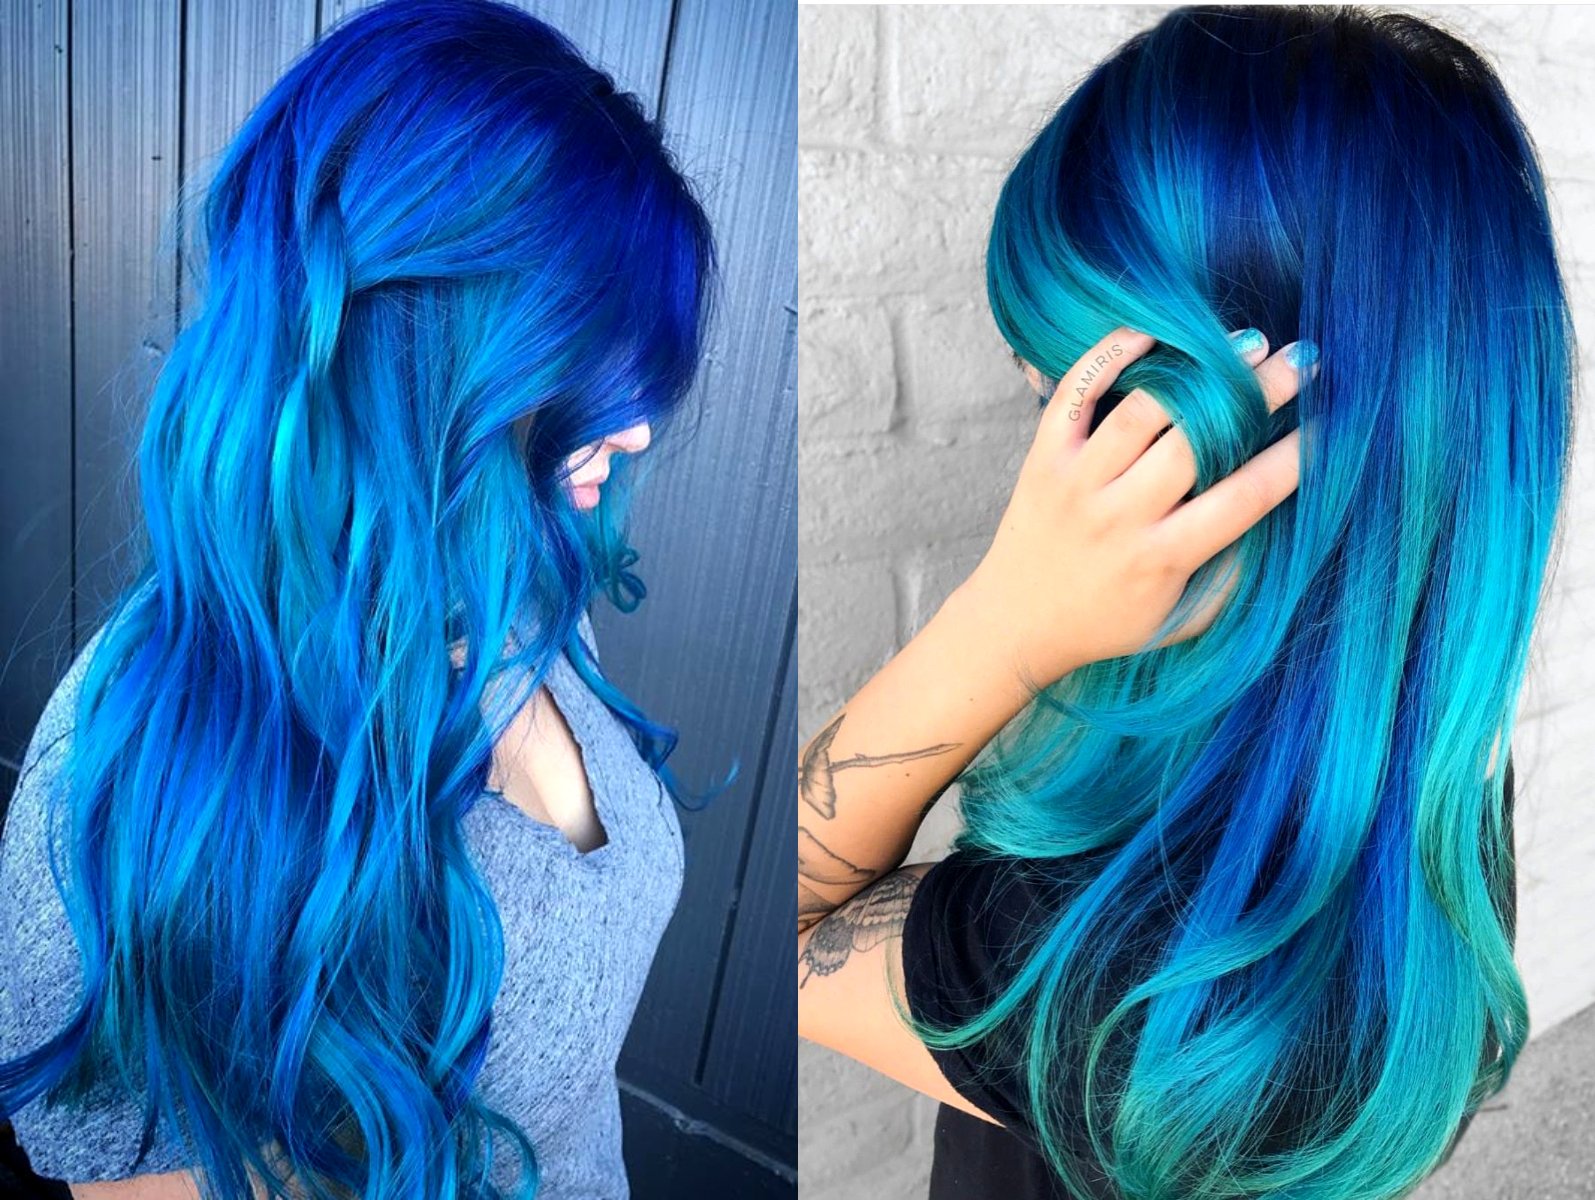 1. Dark Blue Balayage Hair: 50 Stunning Examples to Inspire Your Next Look - wide 5